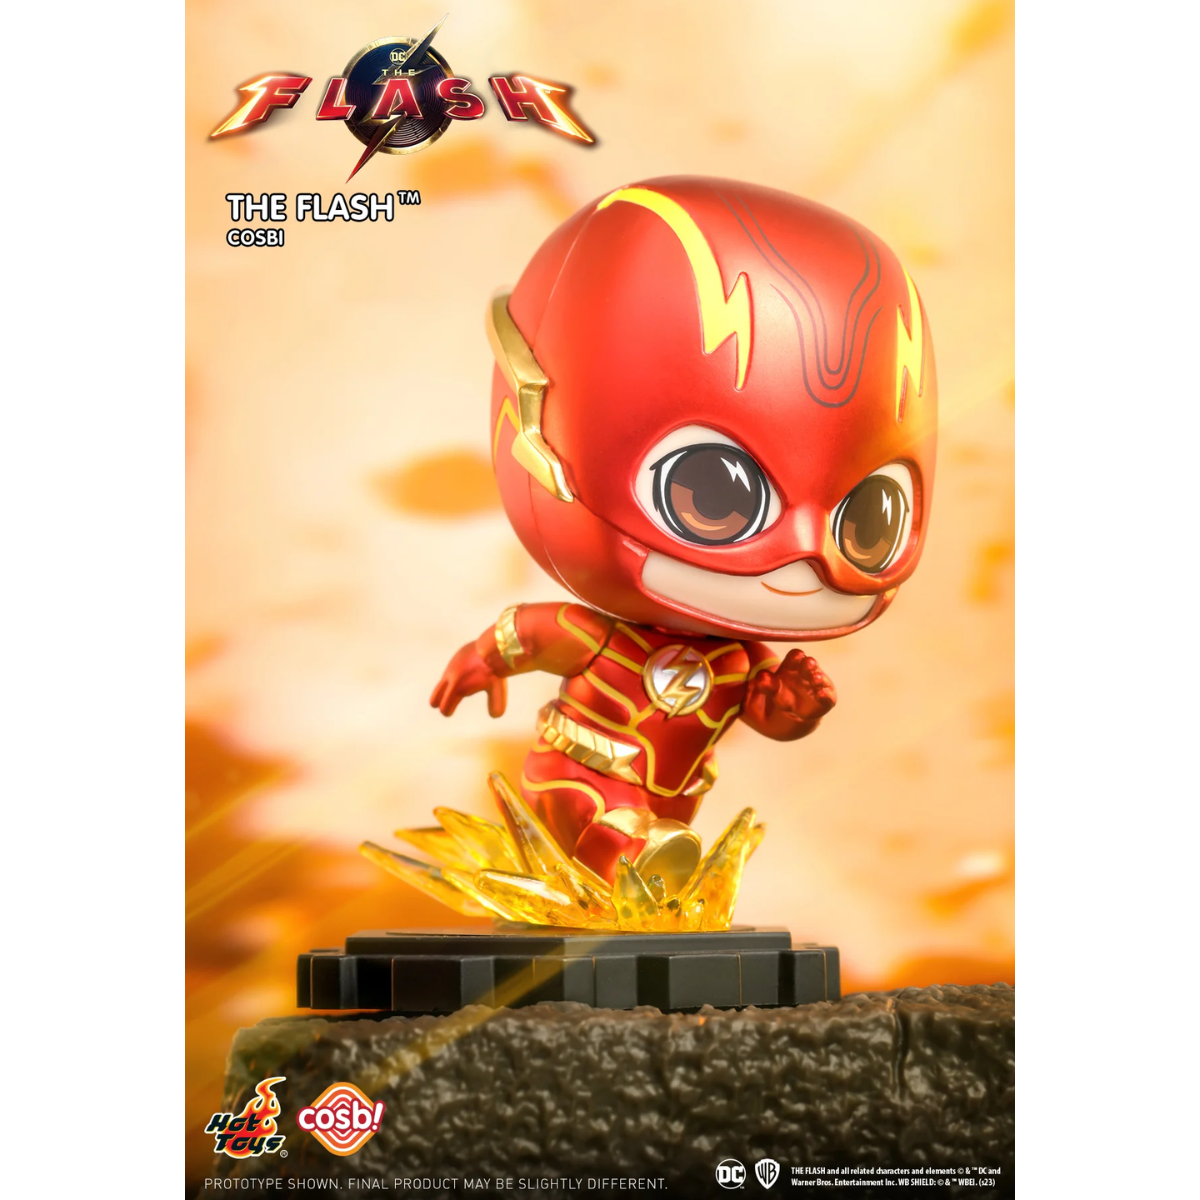 The Flash Cosbi Collection-Single Box (Random)-Cosbi-Ace Cards & Collectibles